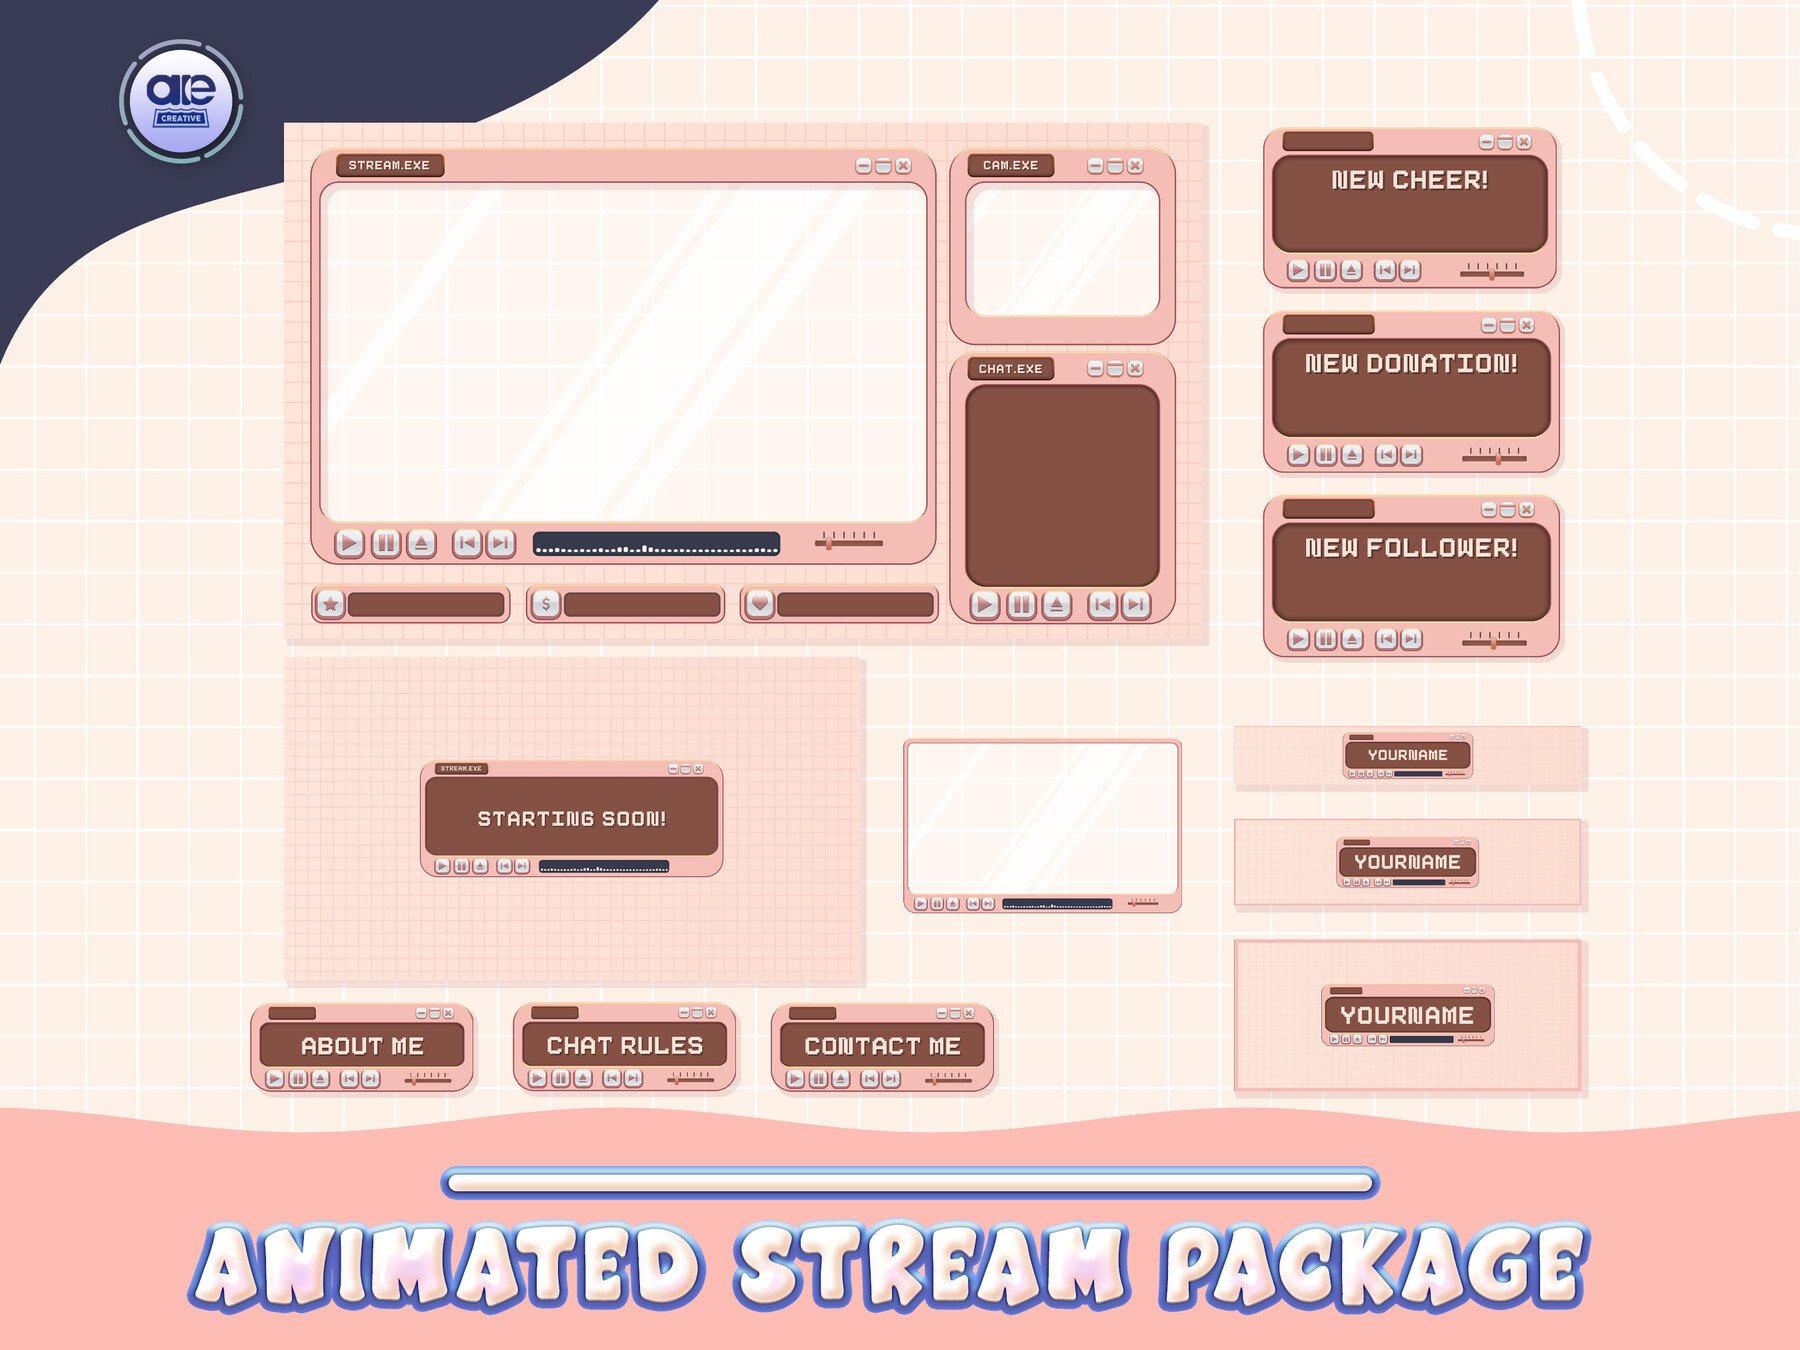 ArtStation - Animated Stream Package Brown, kawaii stream pack, animated  twitch screens, animated twitch alerts, twitch layout animated | Artworks